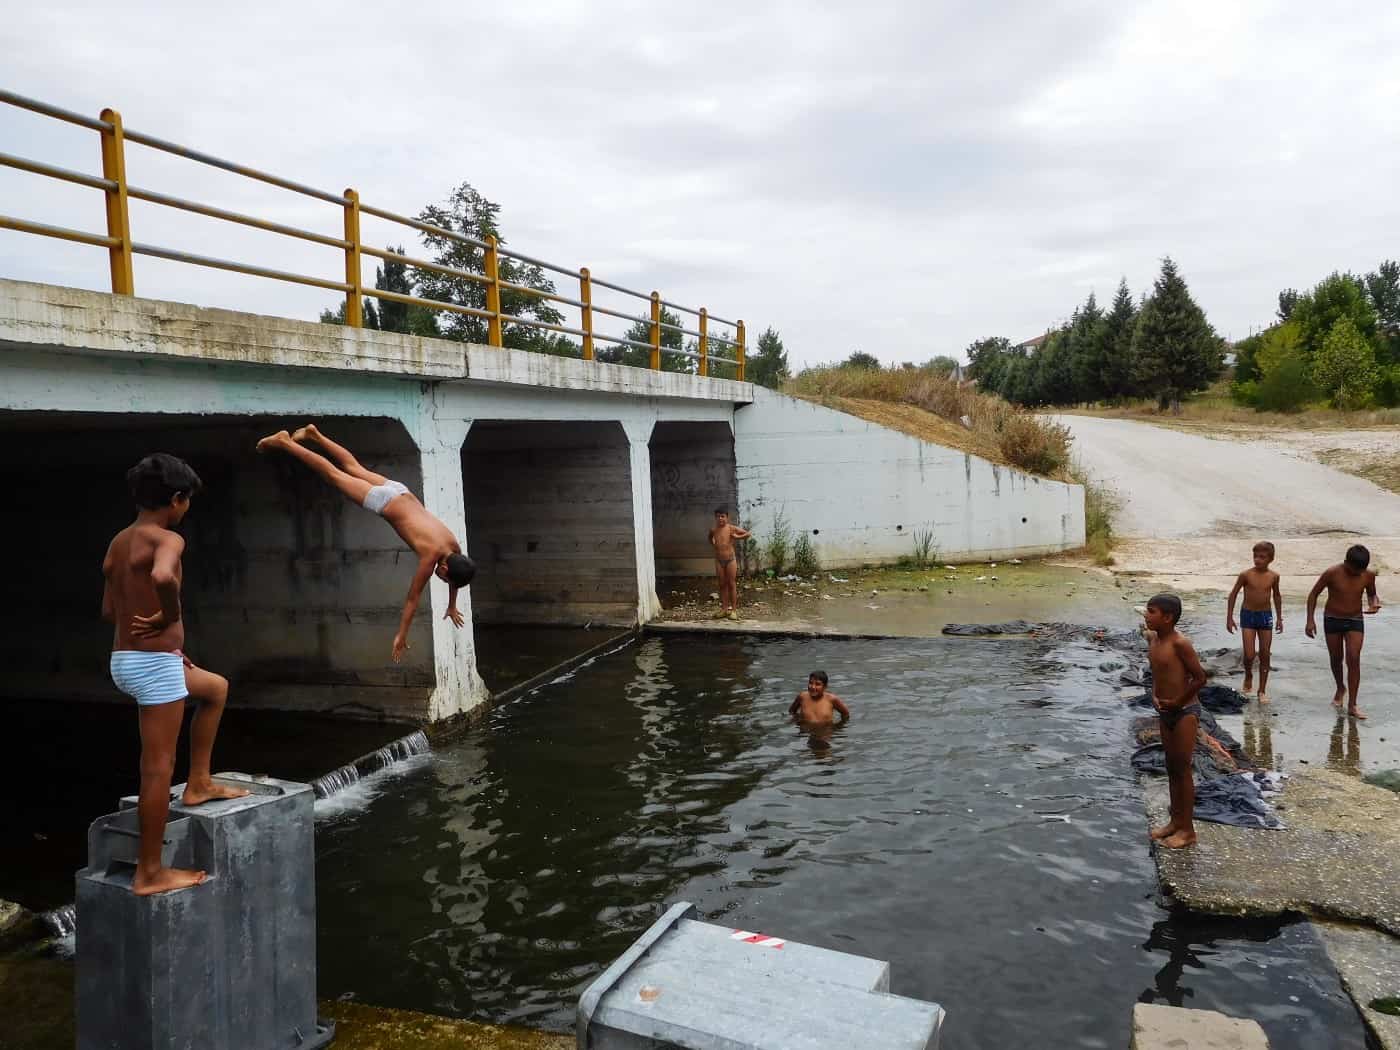 A group of boys swim and dive into the water by a bridge